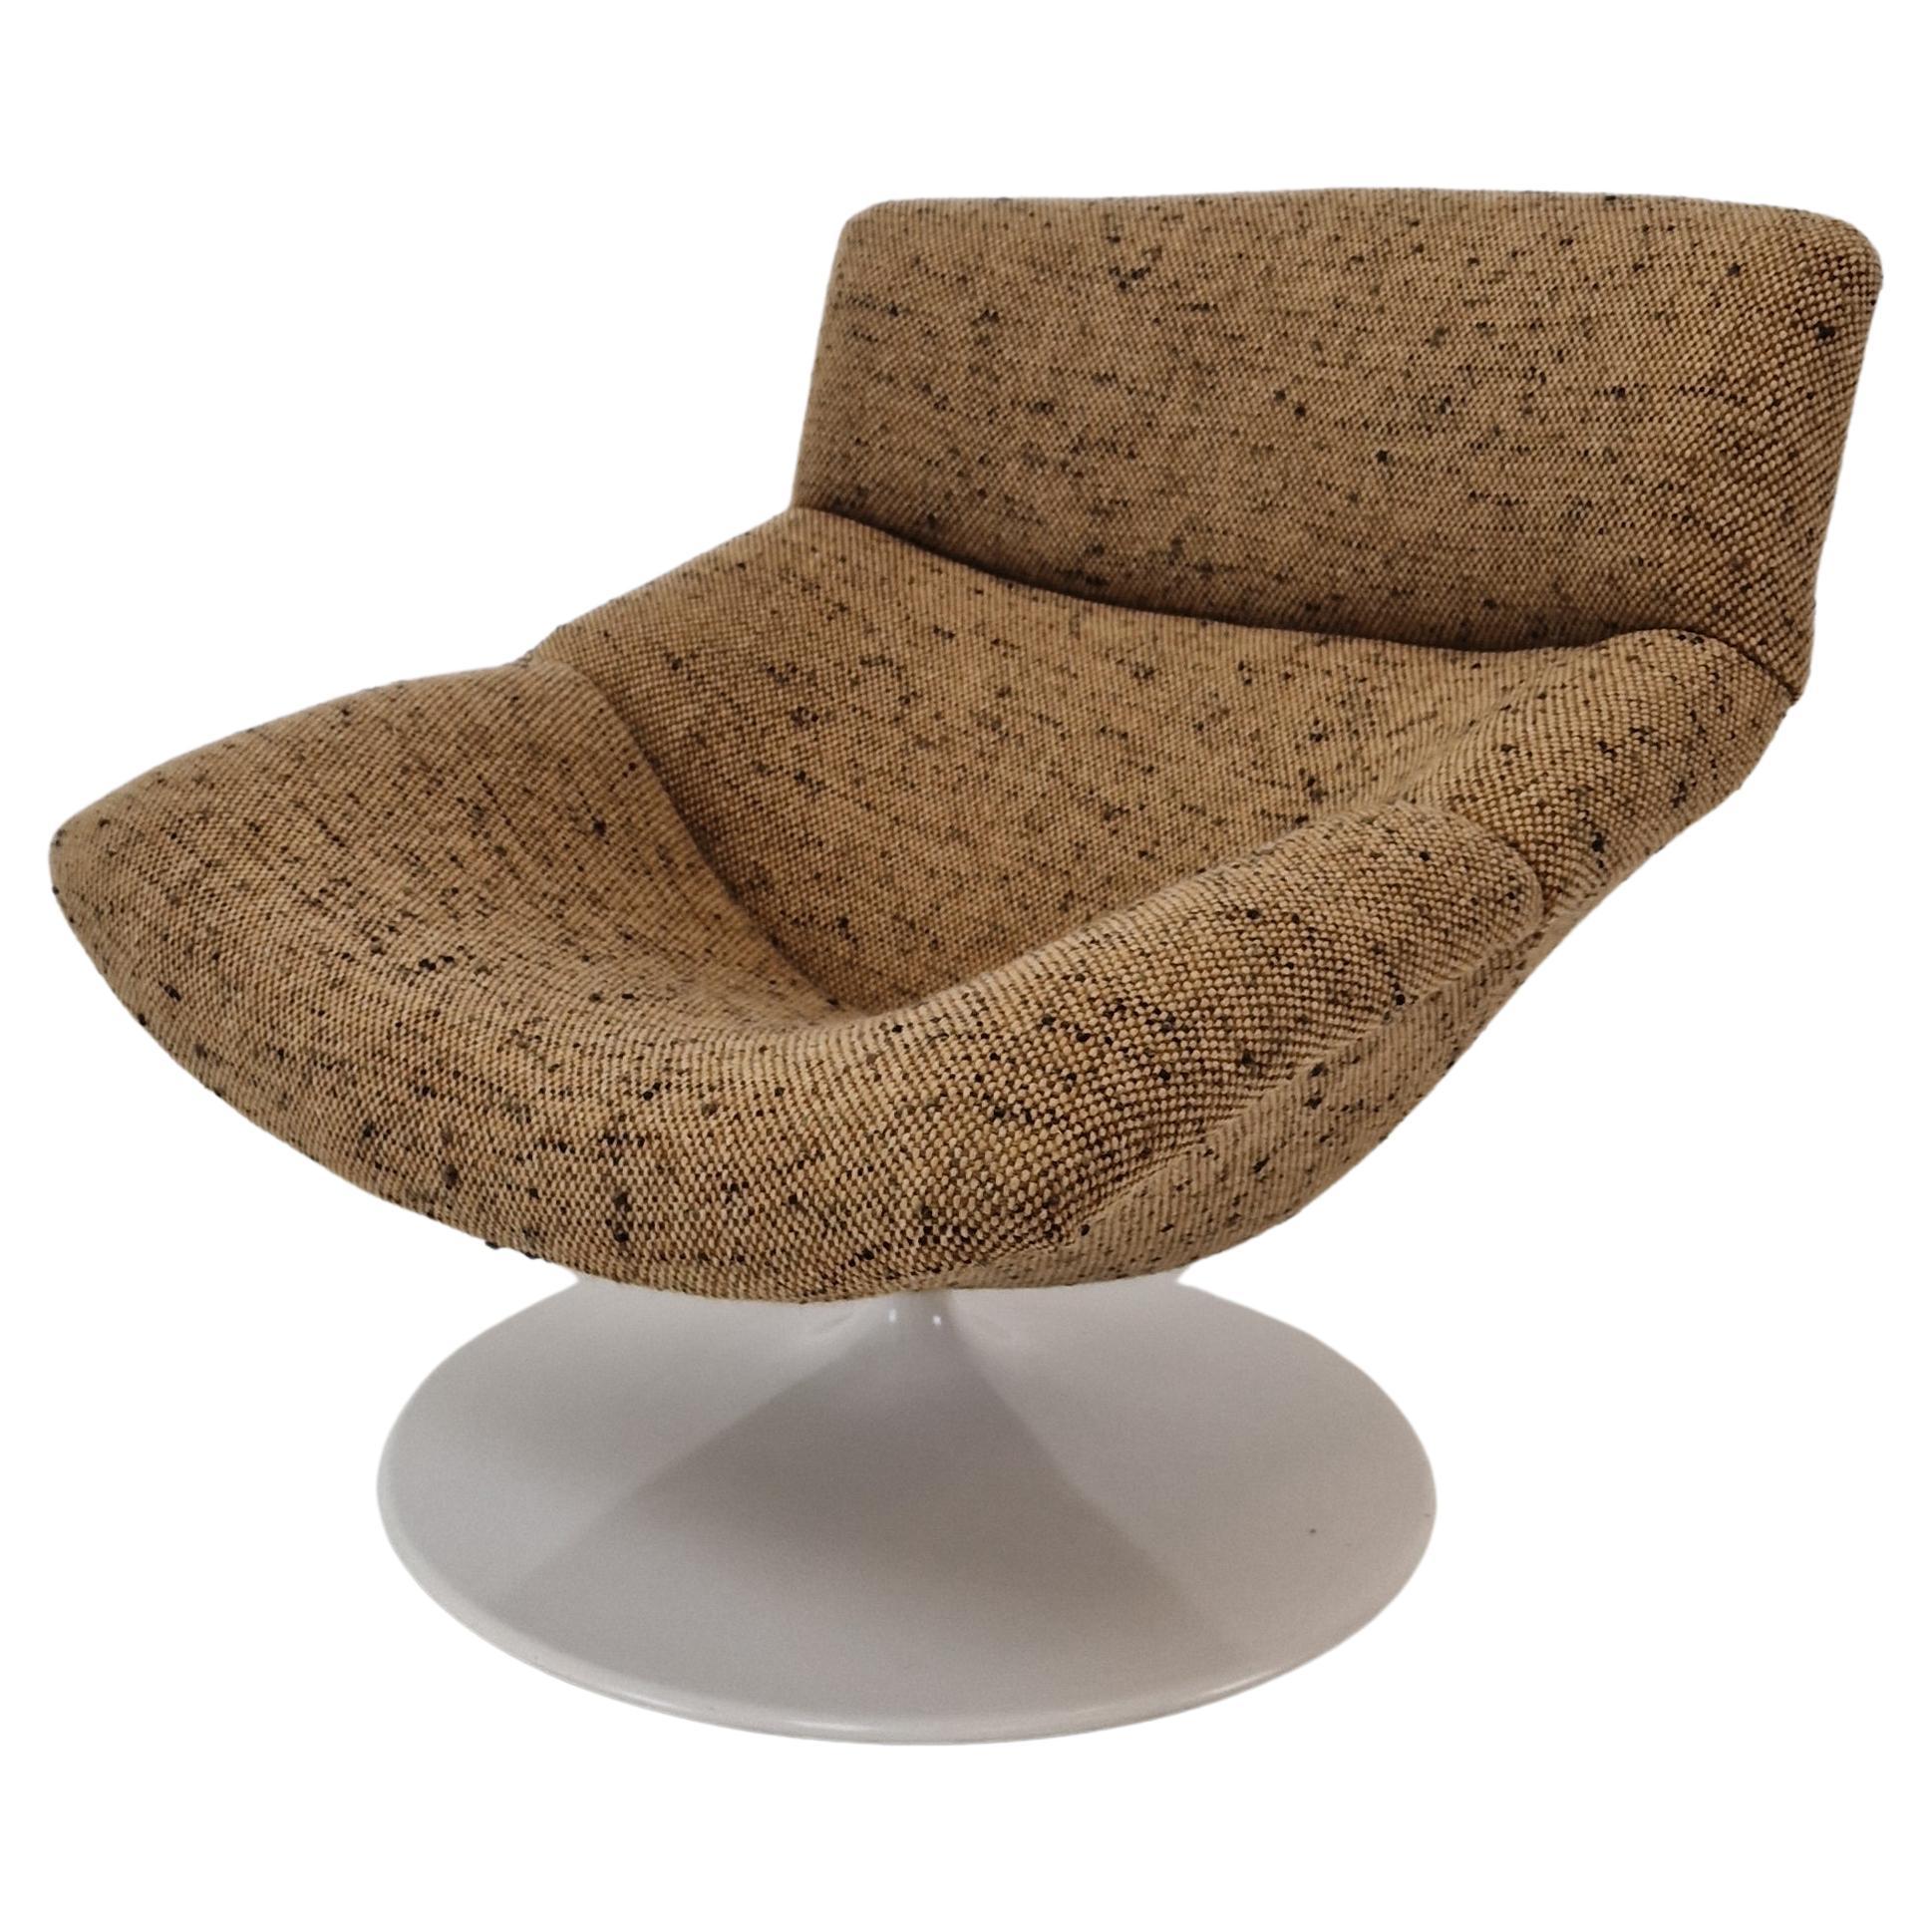 Midcentury F518 Lounge Chair by Geoffrey Harcourt for Artifort, 1970s